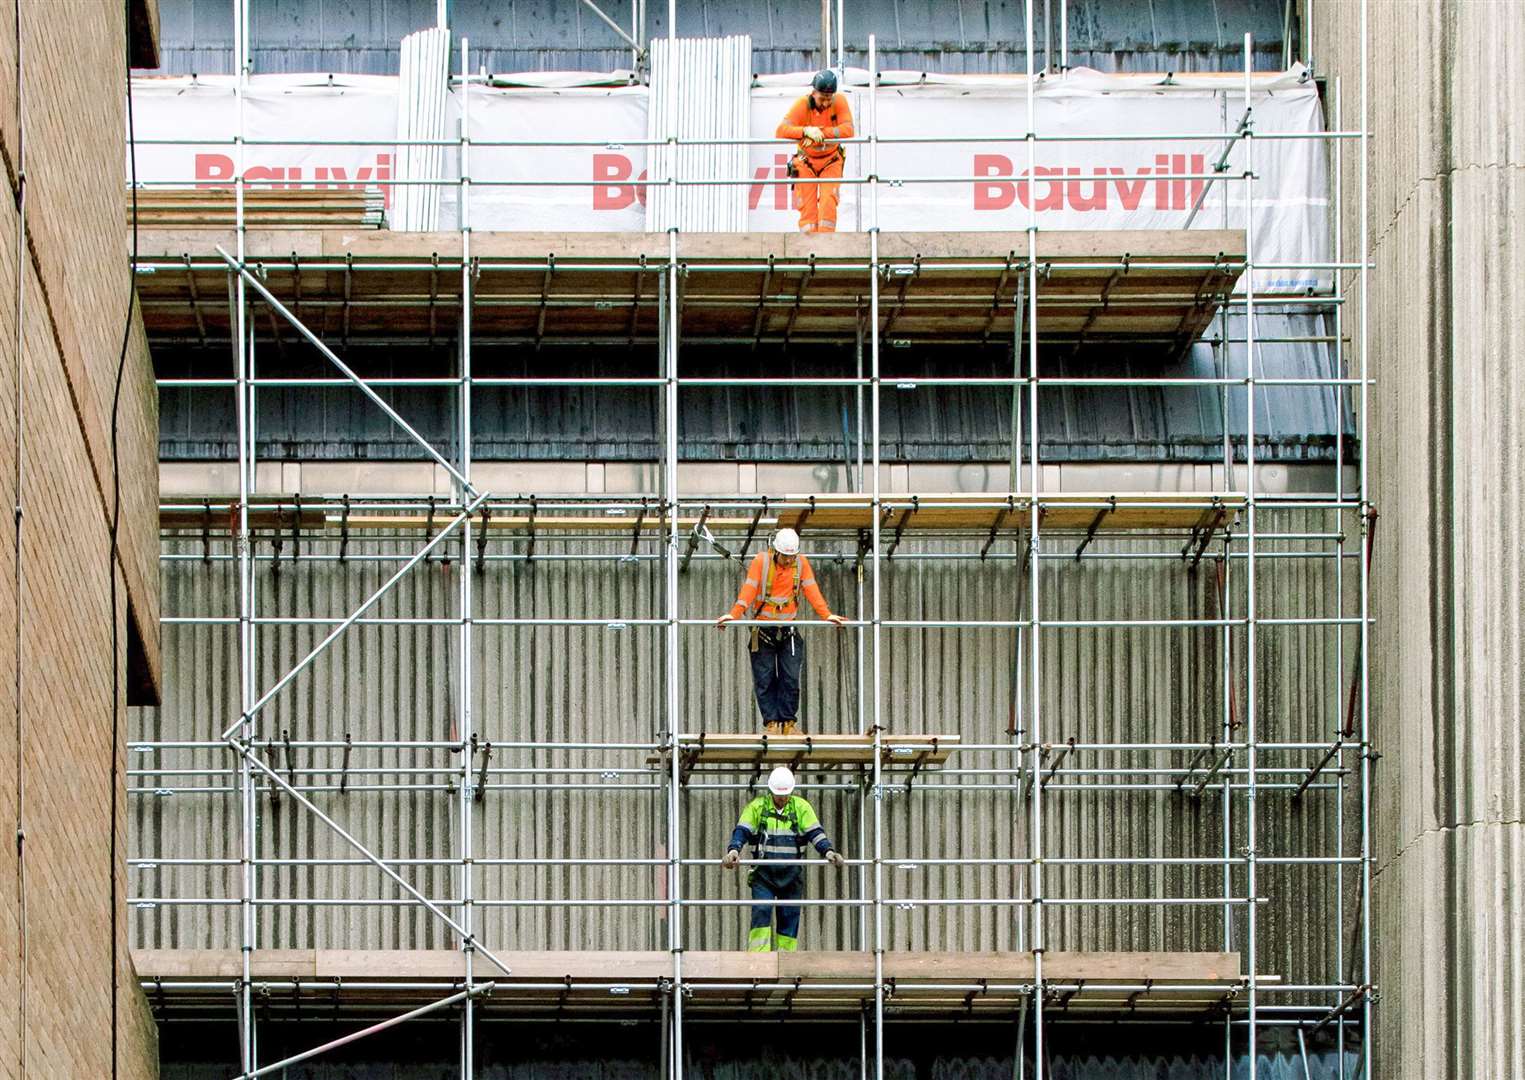 Bauvill's team on site